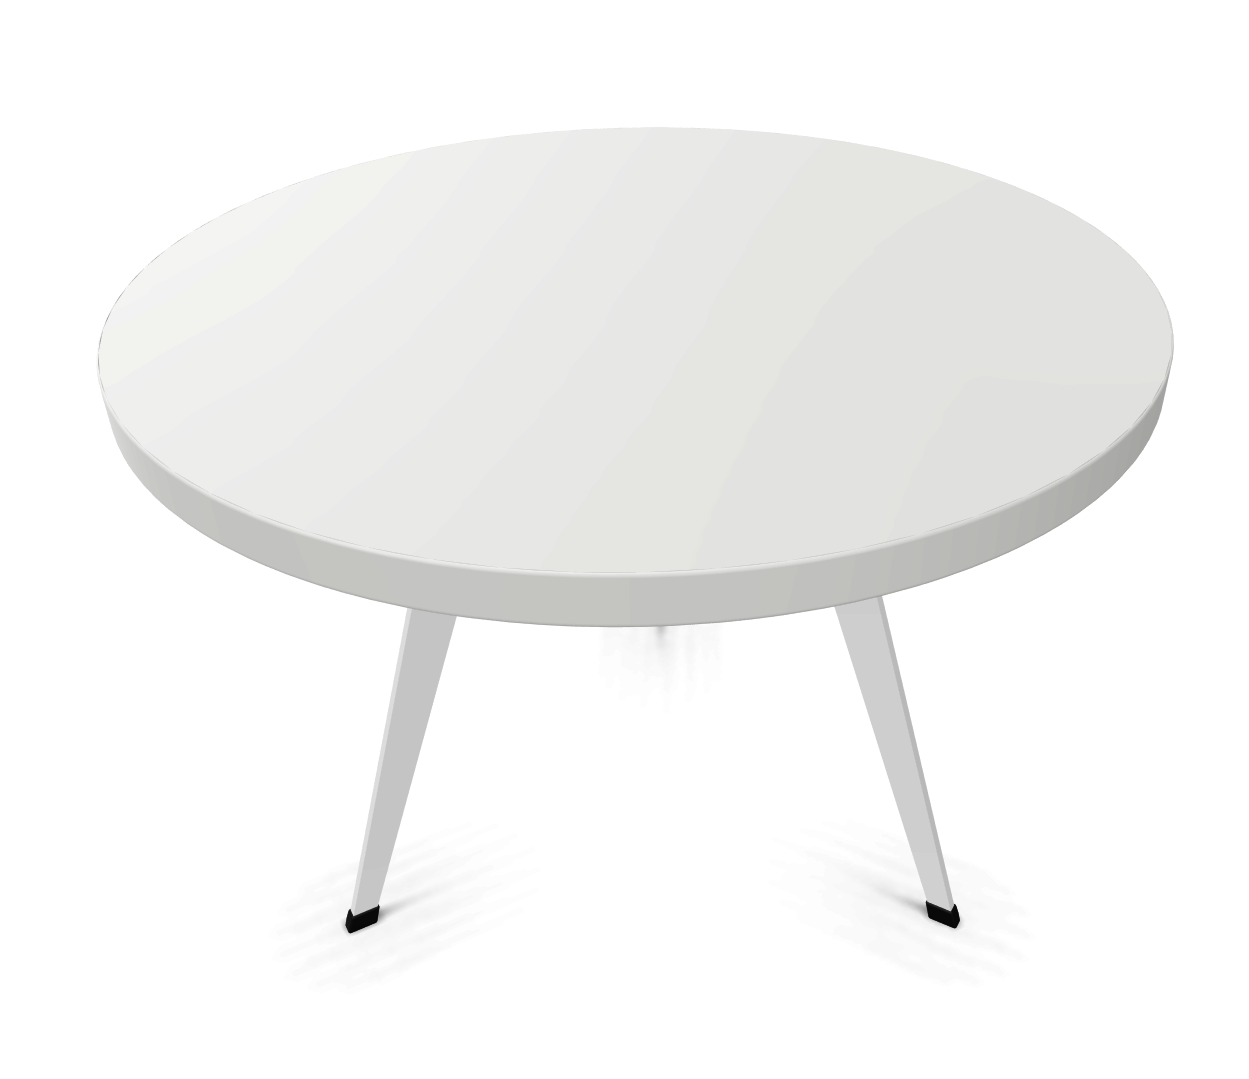 Bend Coffee Table Home, Office, Garden online marketplace